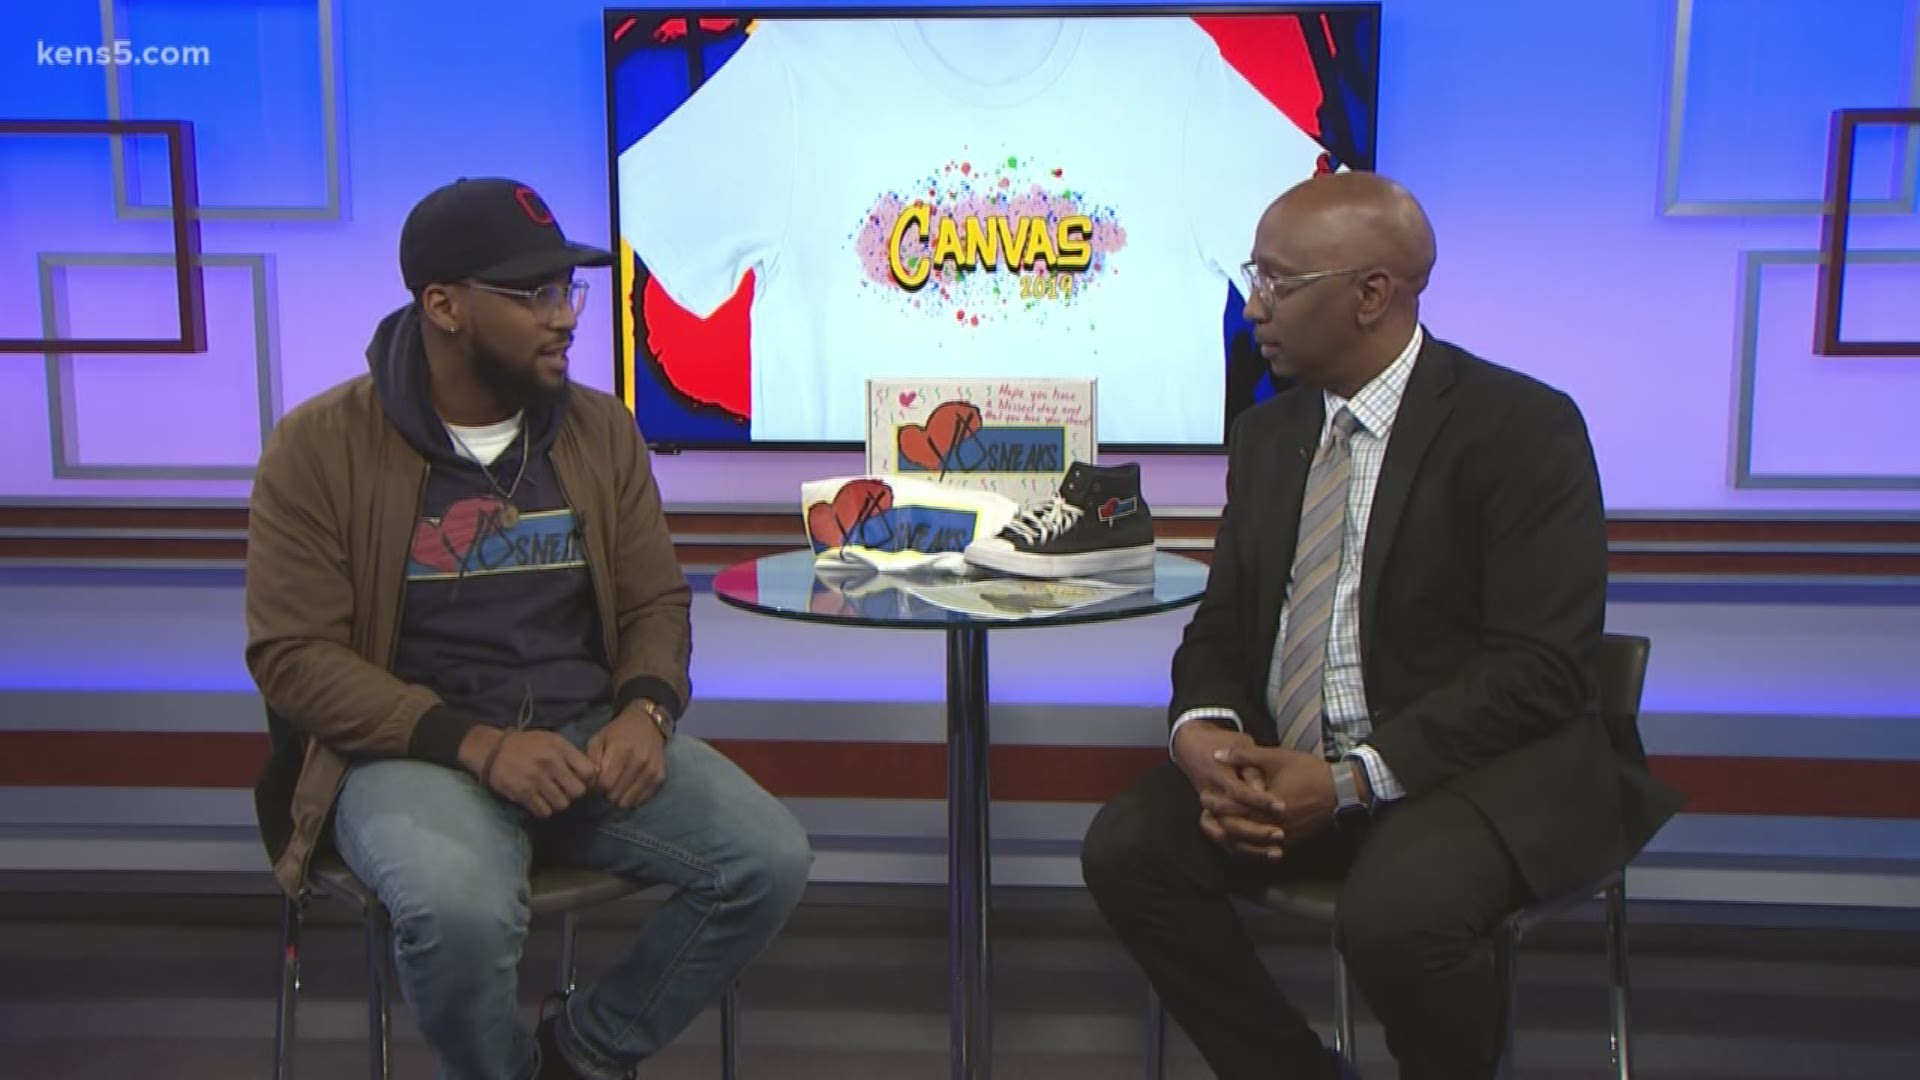 A non-profit, known for helping a community in need, needs your help. "I Heart Yo Sneaks" is hosting an event to help raise money to give back to local at-risk youth. Henry Mahome stops by the KENS 5 studio to share more on how you can help.